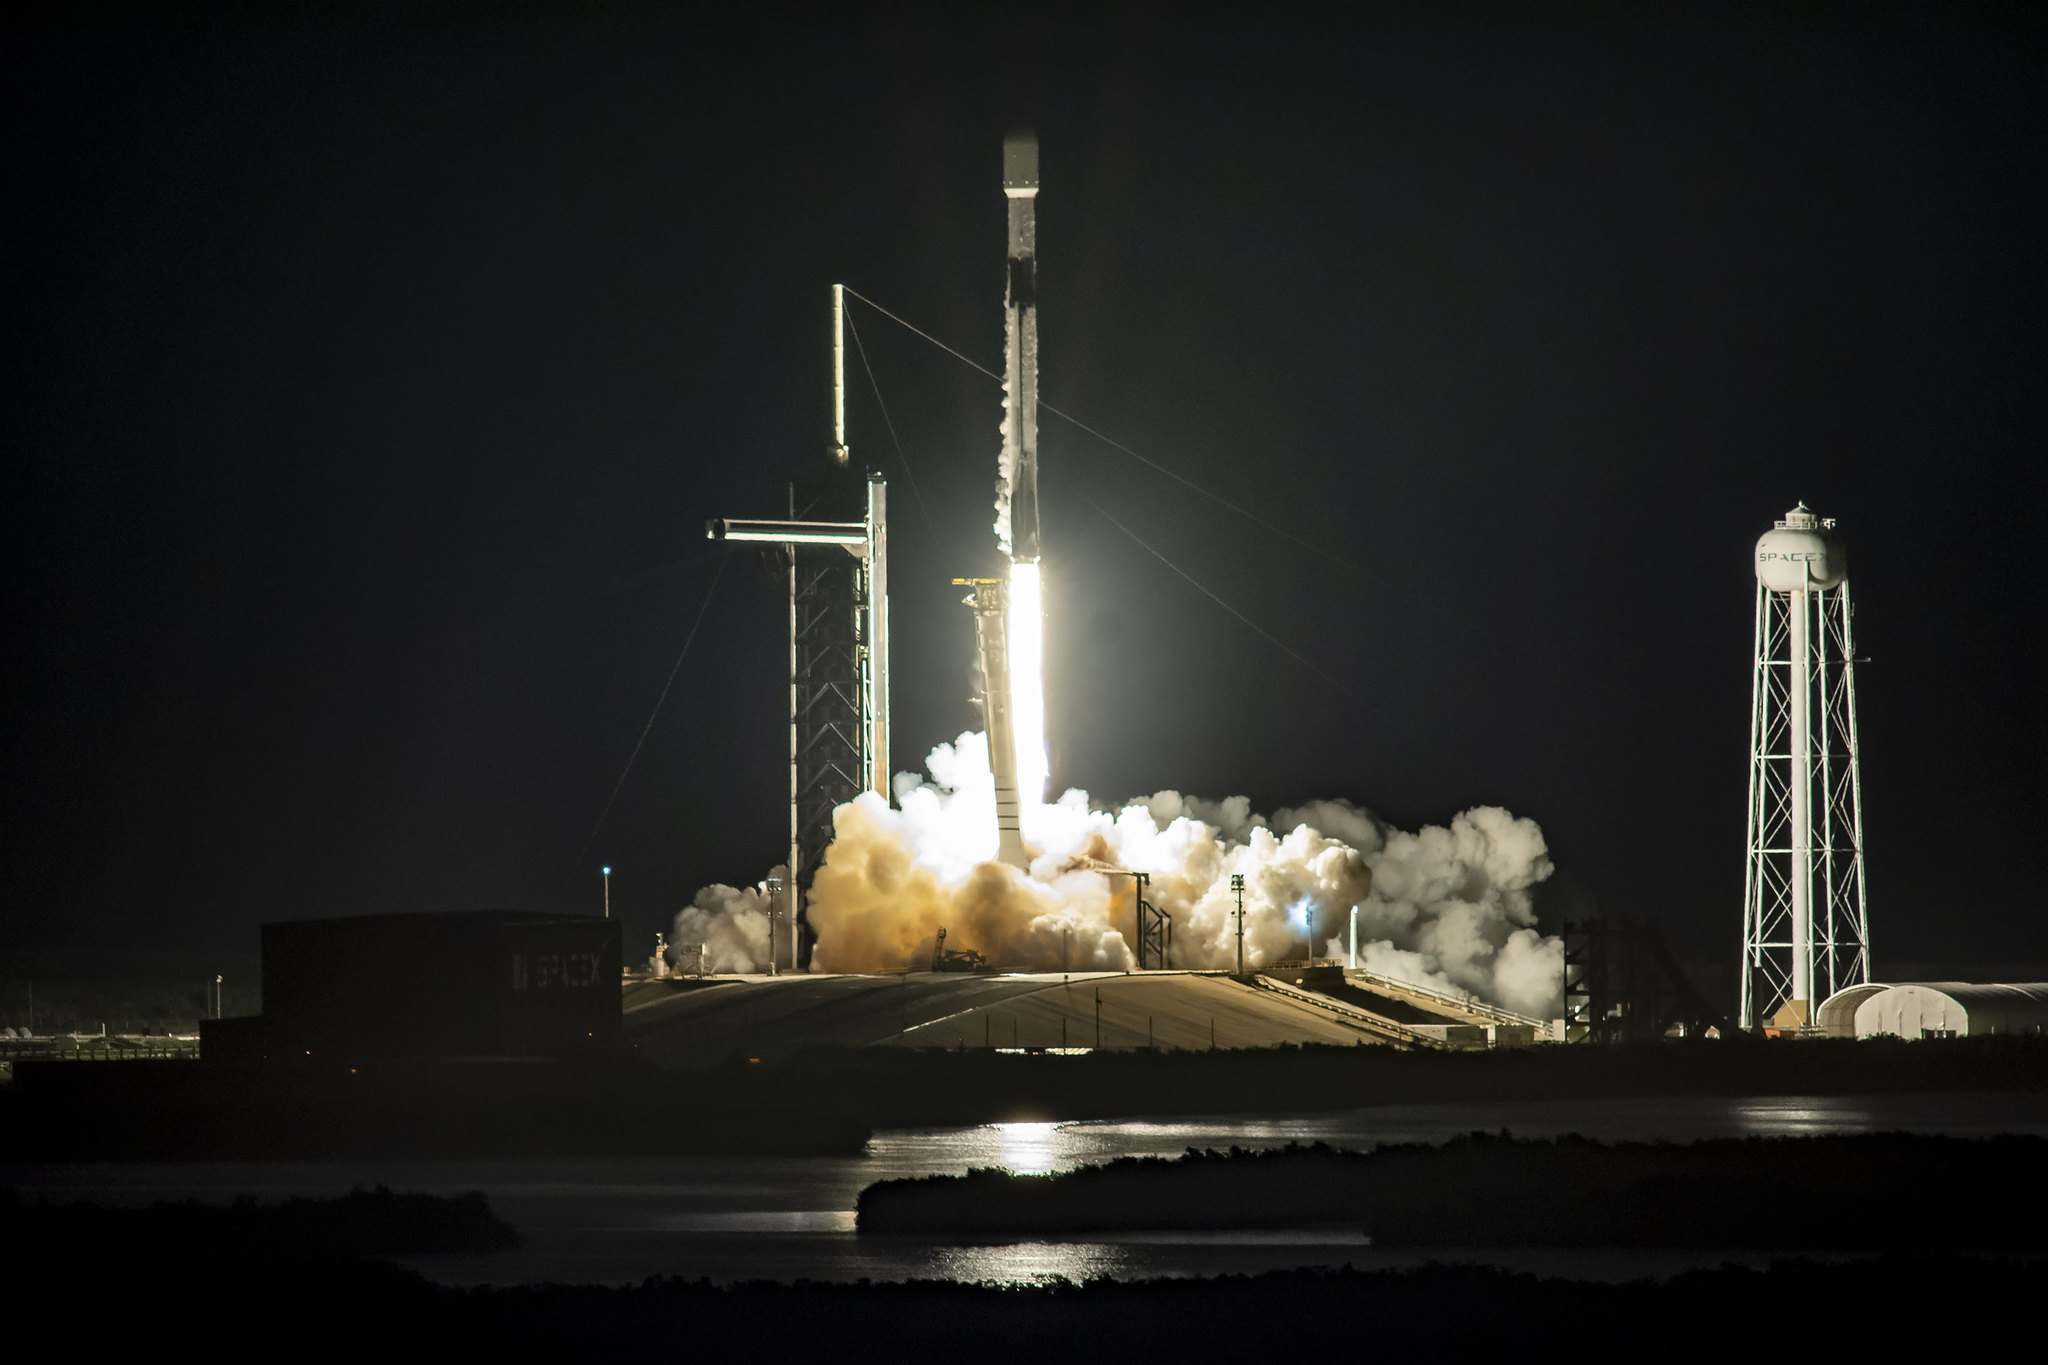 Founded by former SpaceX engineers, First Resonance pitches tools to make things the SpaceX way